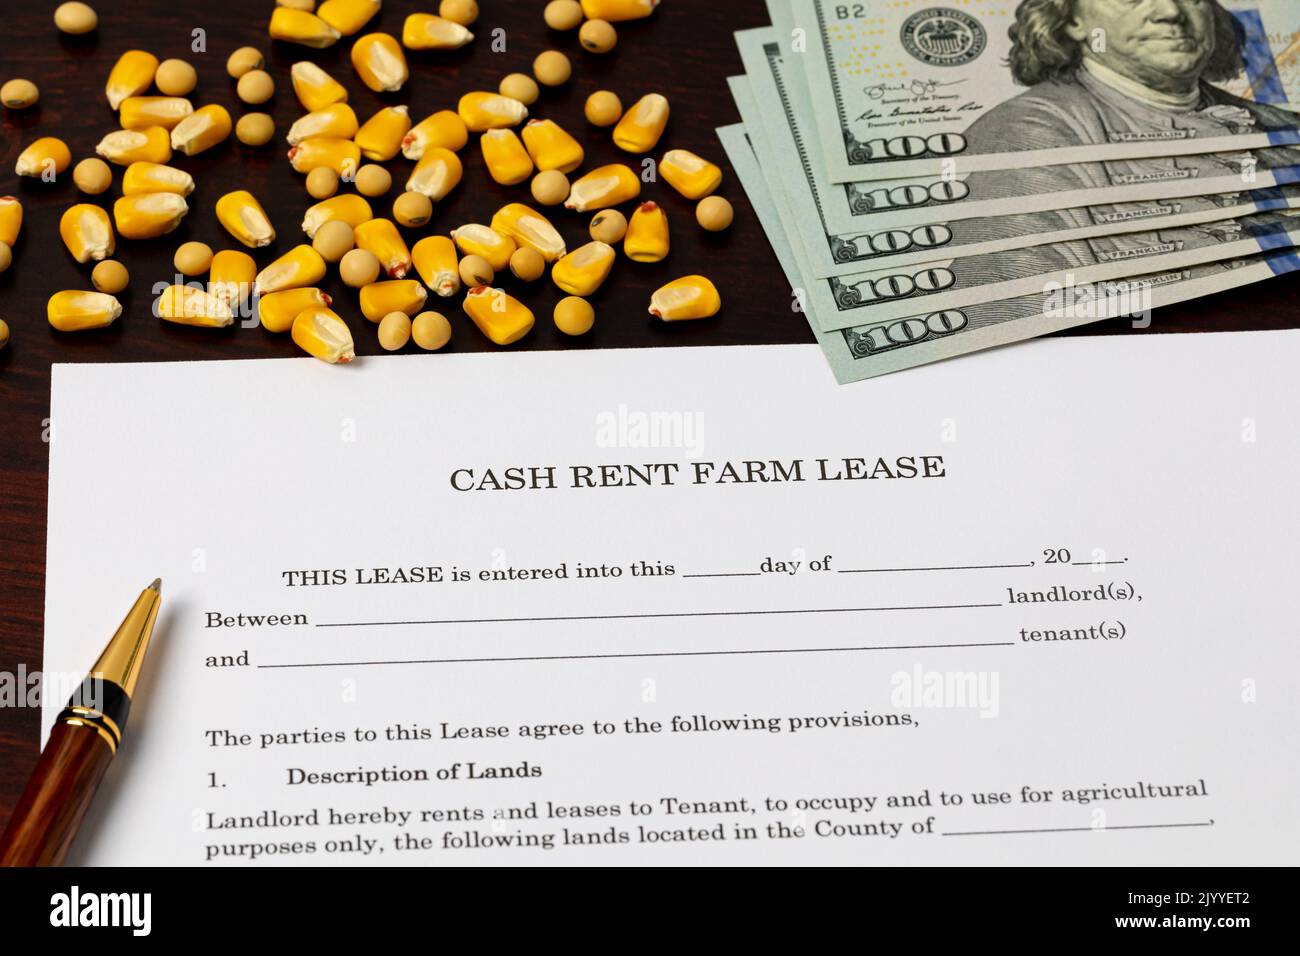 Cash rent farm lease document with corn and soybean seed. Farming, agriculture and tenant farming concept. Stock Photo